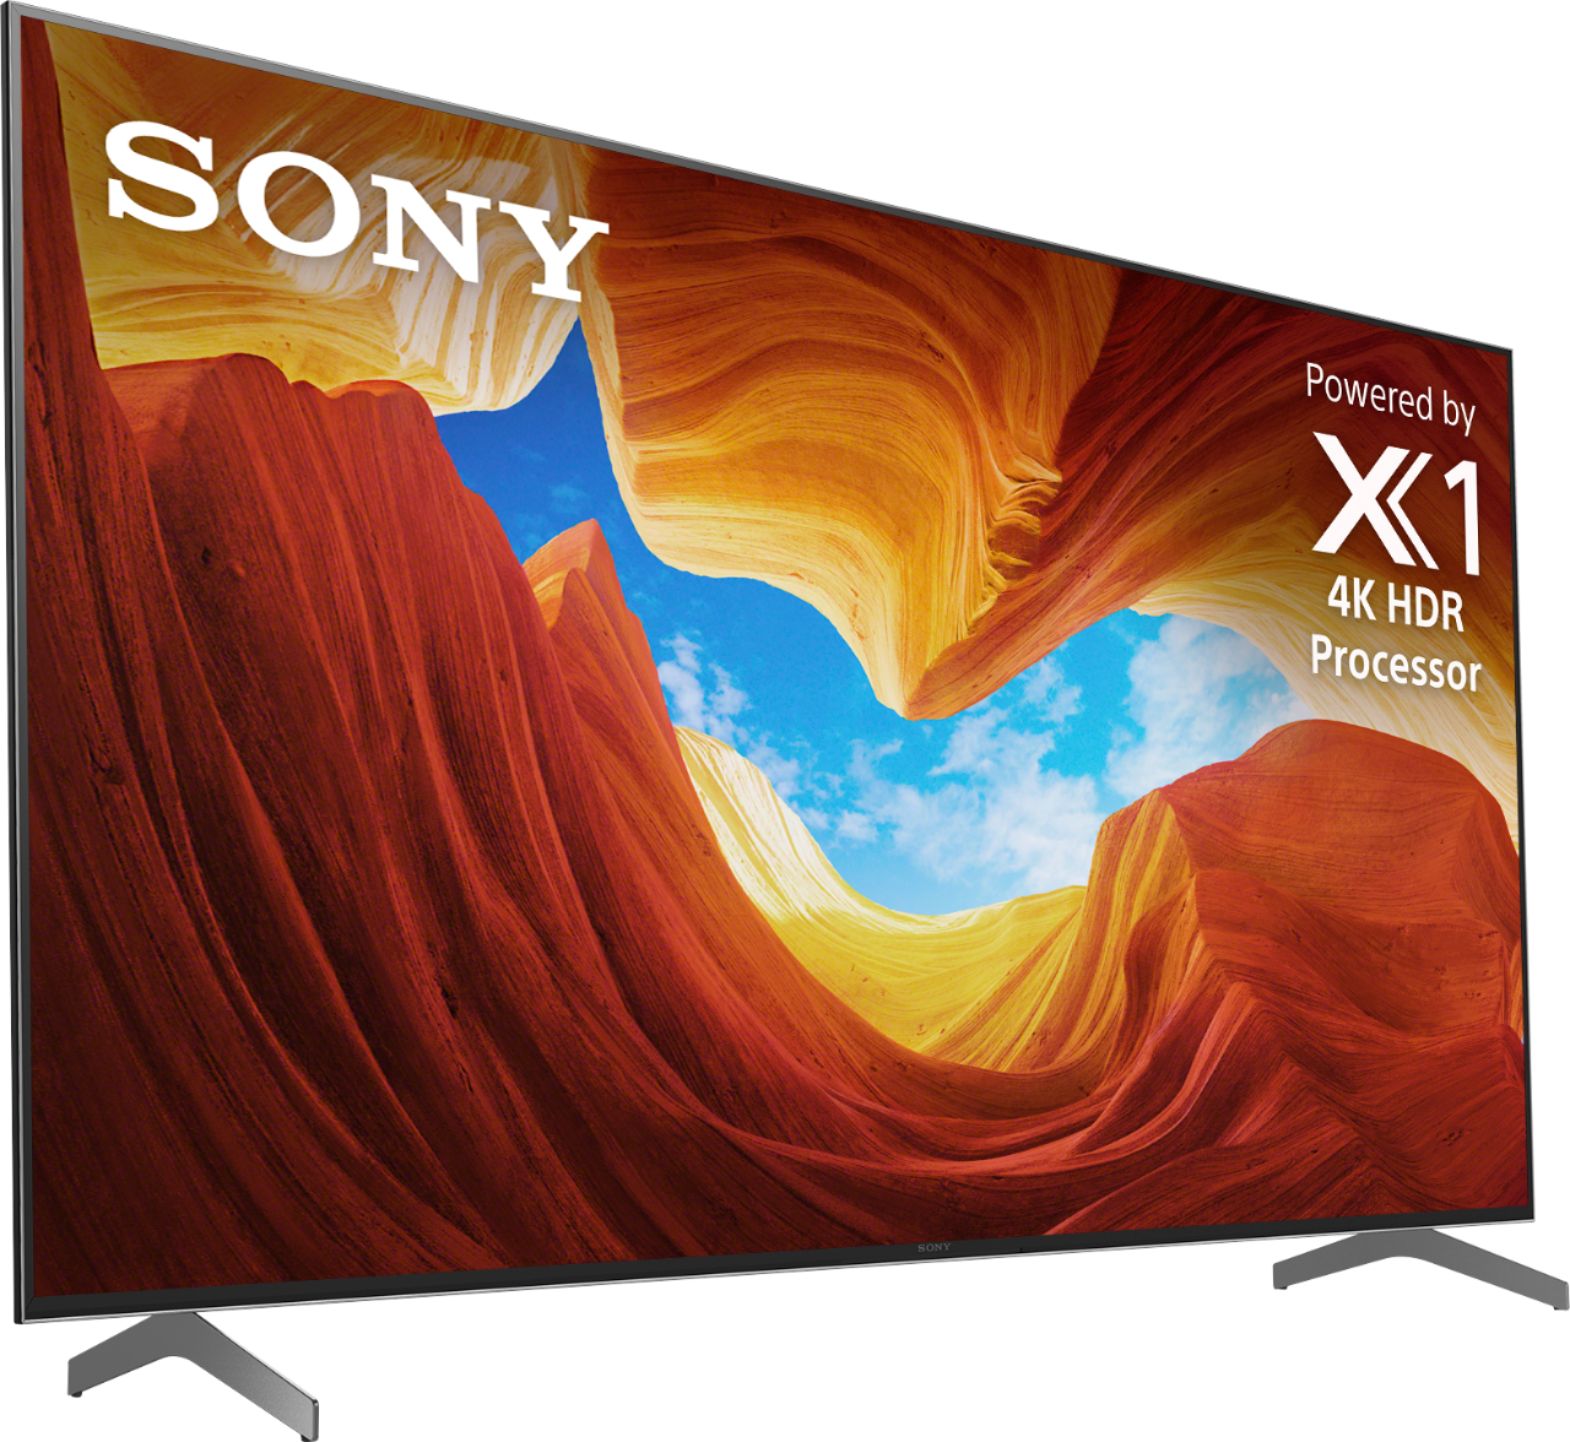 Angle View: Sony - 75" Class X900H Series LED 4K UHD Smart Android TV